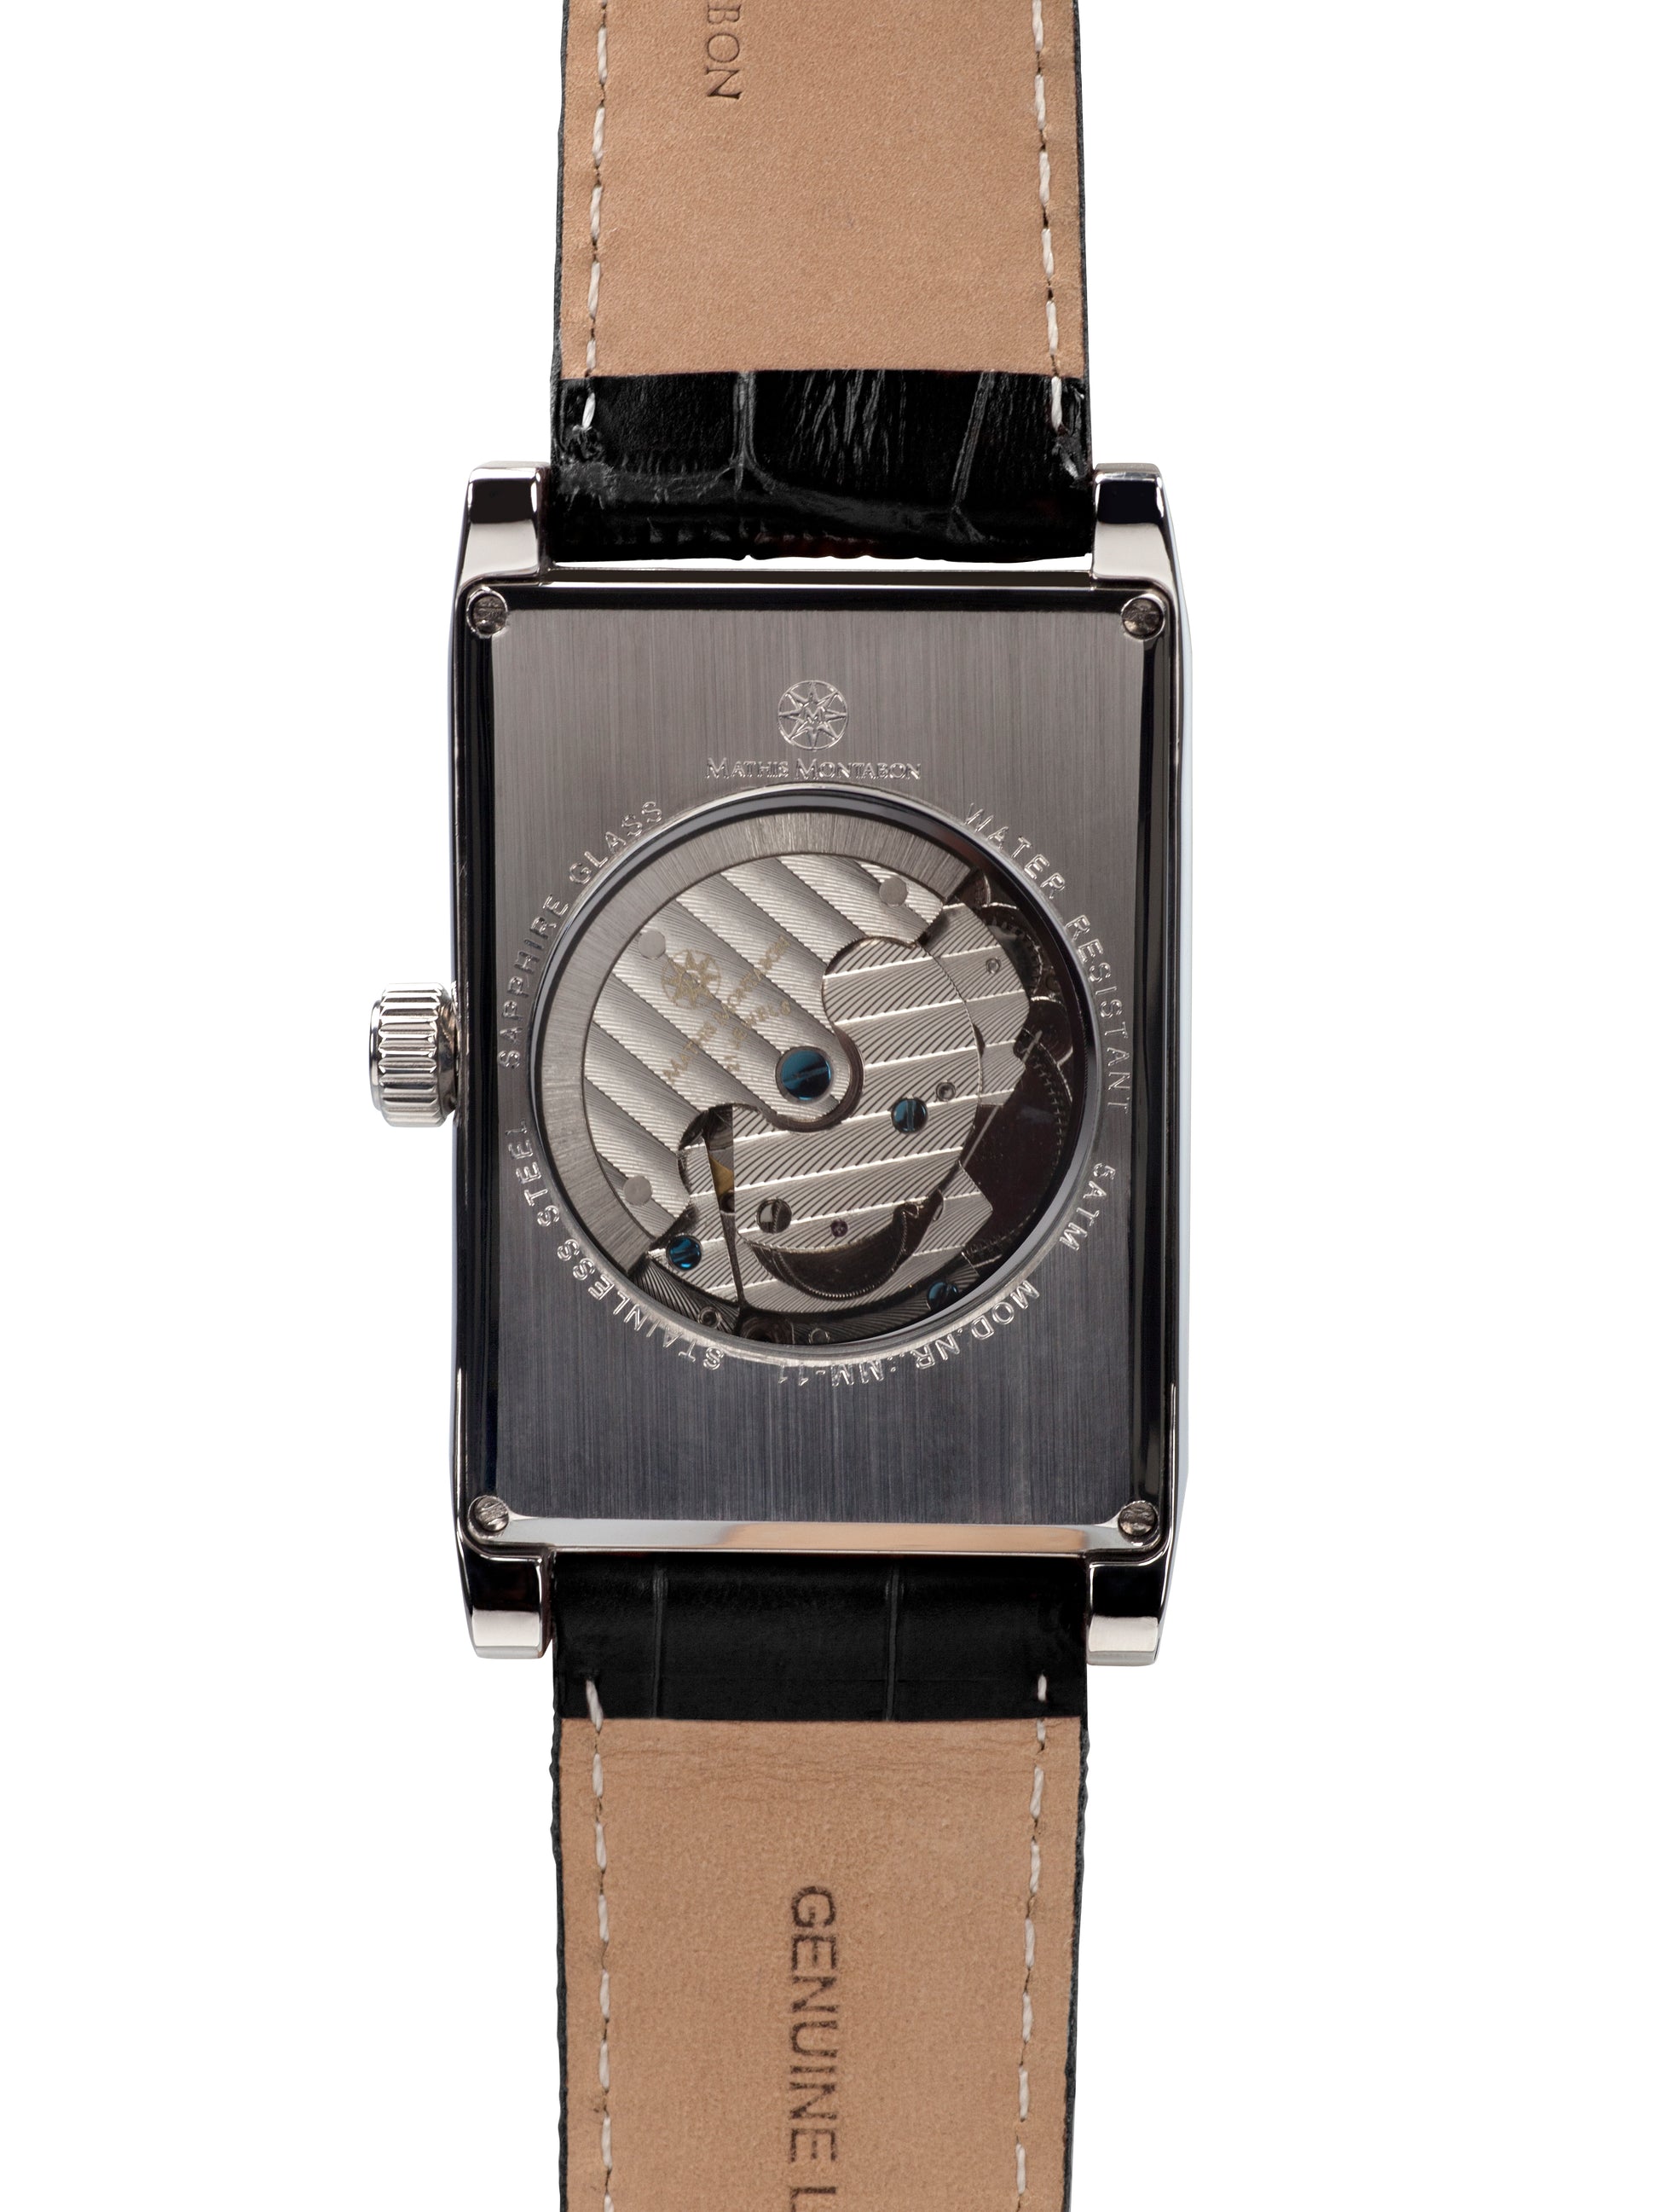 Automatic watches — Rectiligne — Mathis Montabon — silber